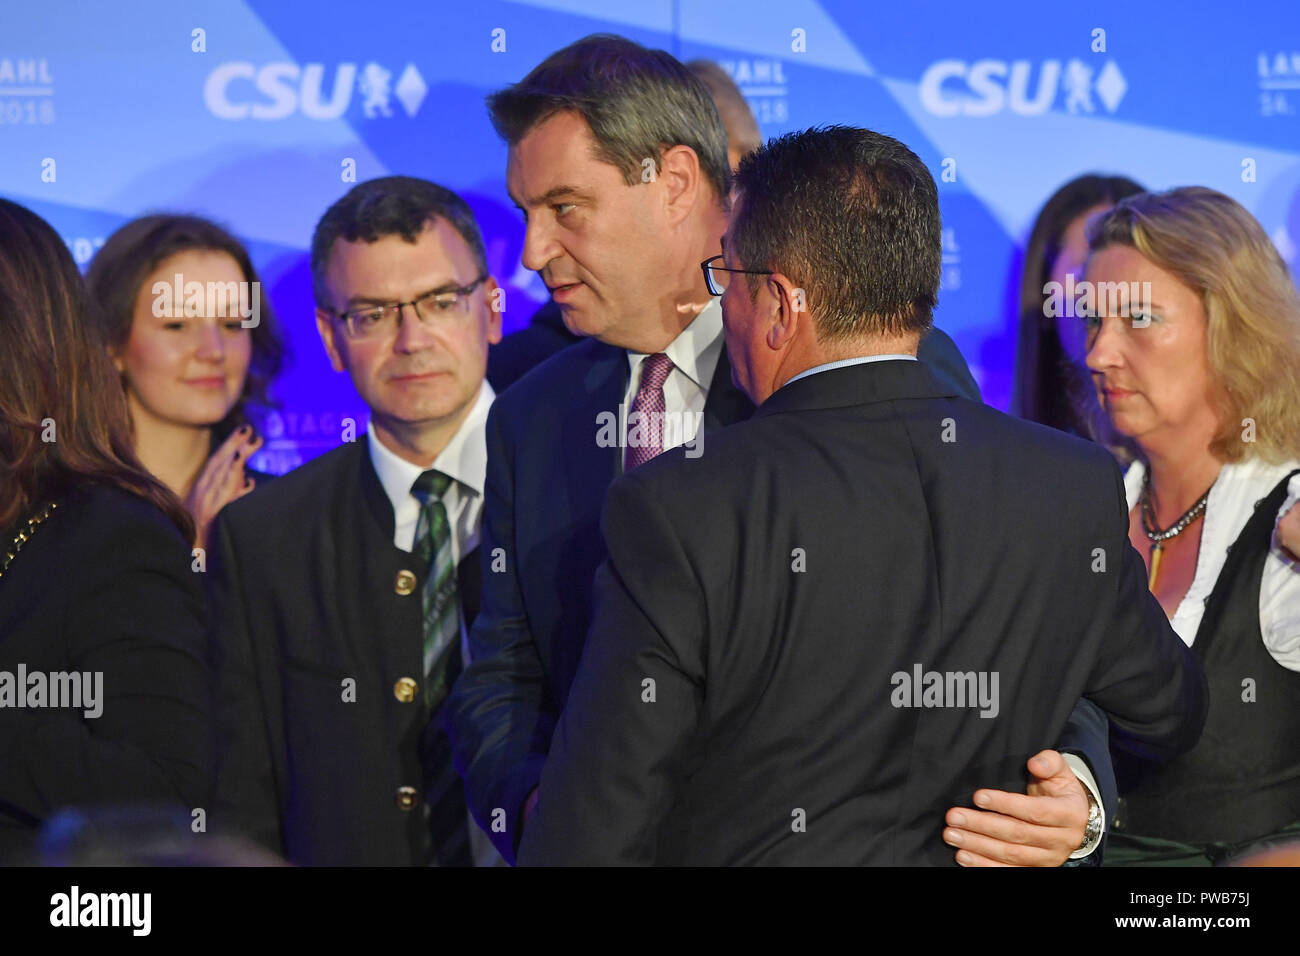 Markus Soeder Prime Minister Of Bavaria And His Cabinet Members